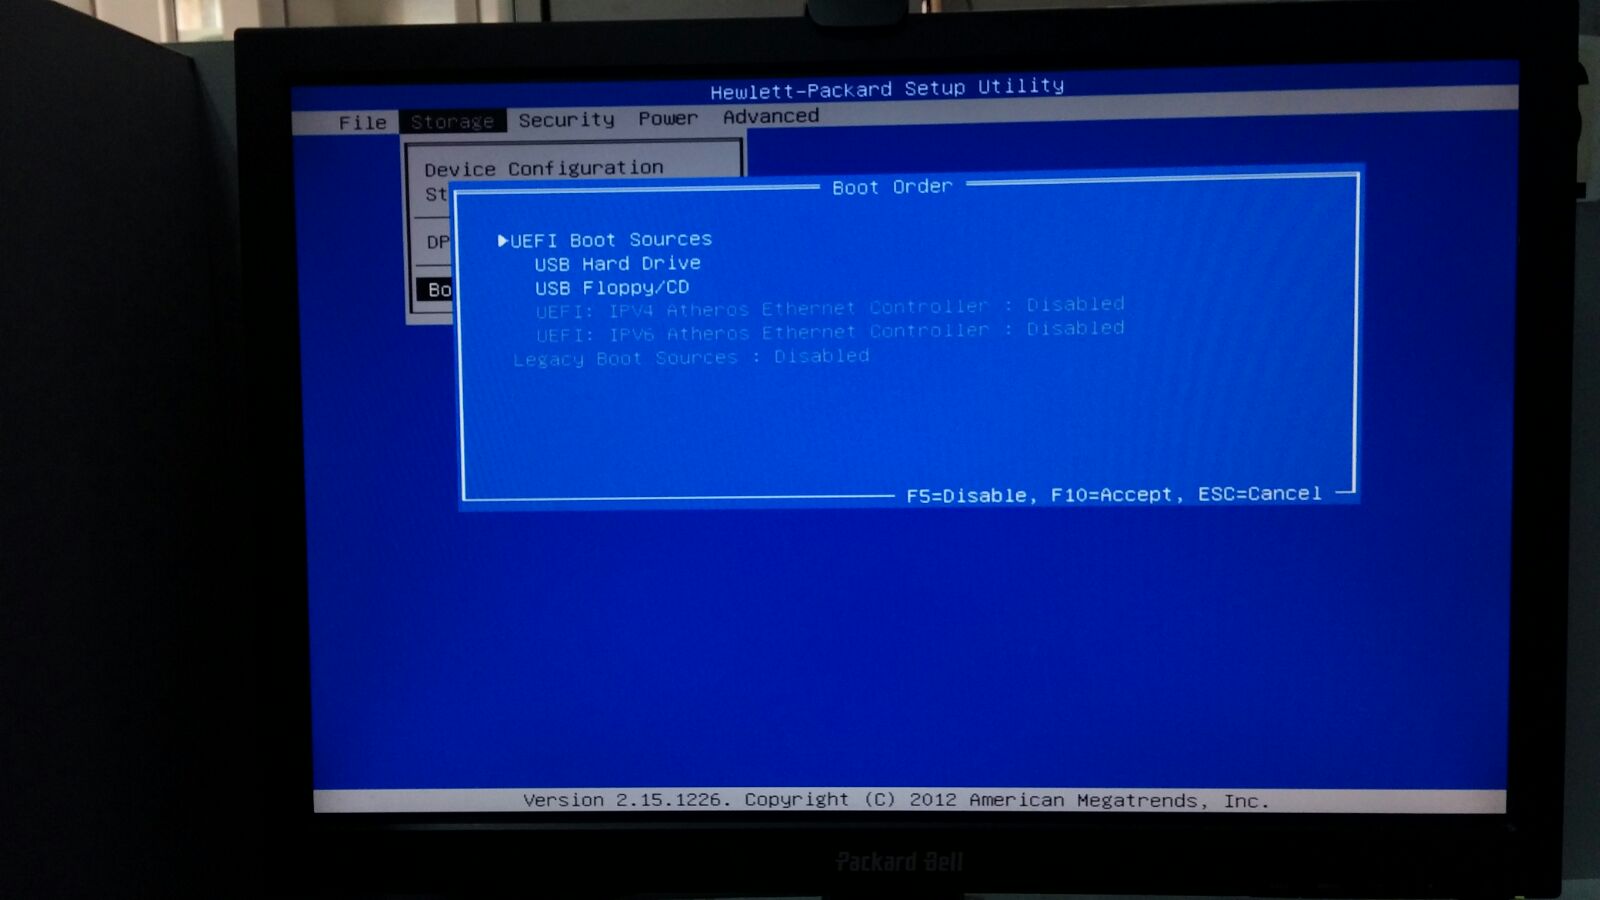 PXE Boot. Boot attempt